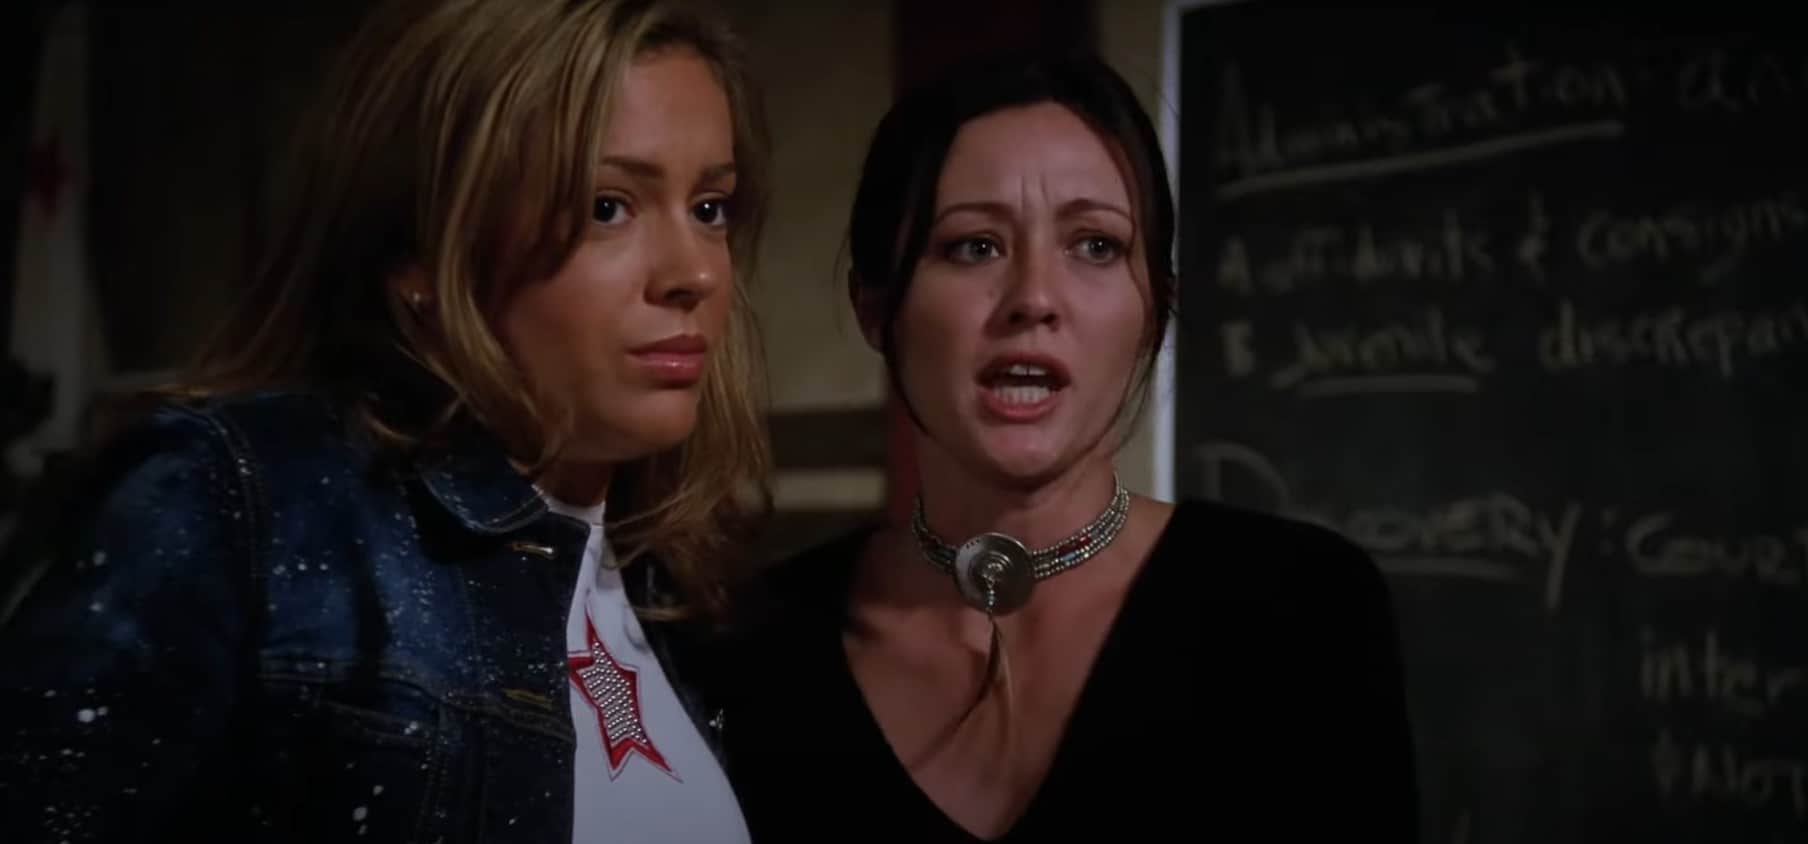 Why Did Prue Leave Charmed?